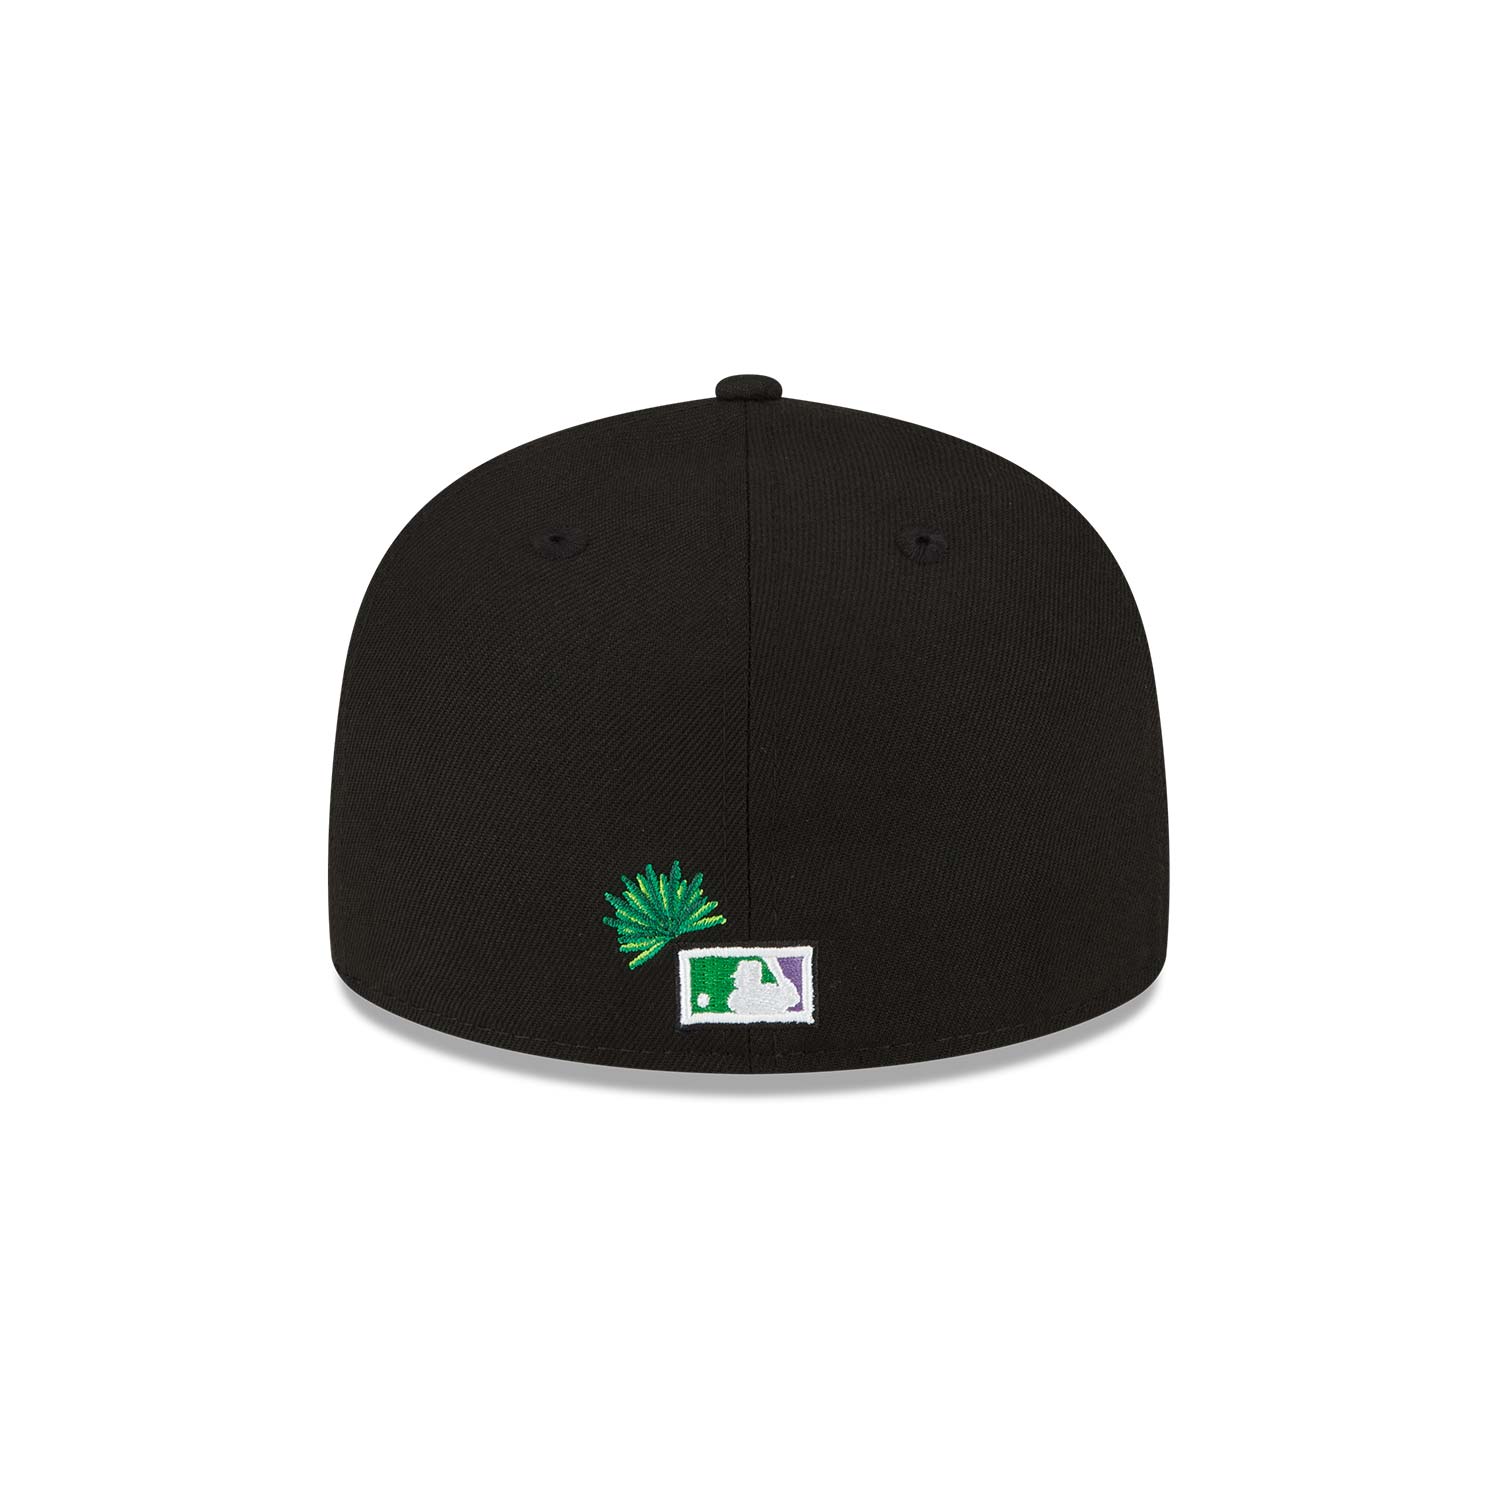 Tampa Bay Rays Stateview Black 59FIFTY Fitted Cap